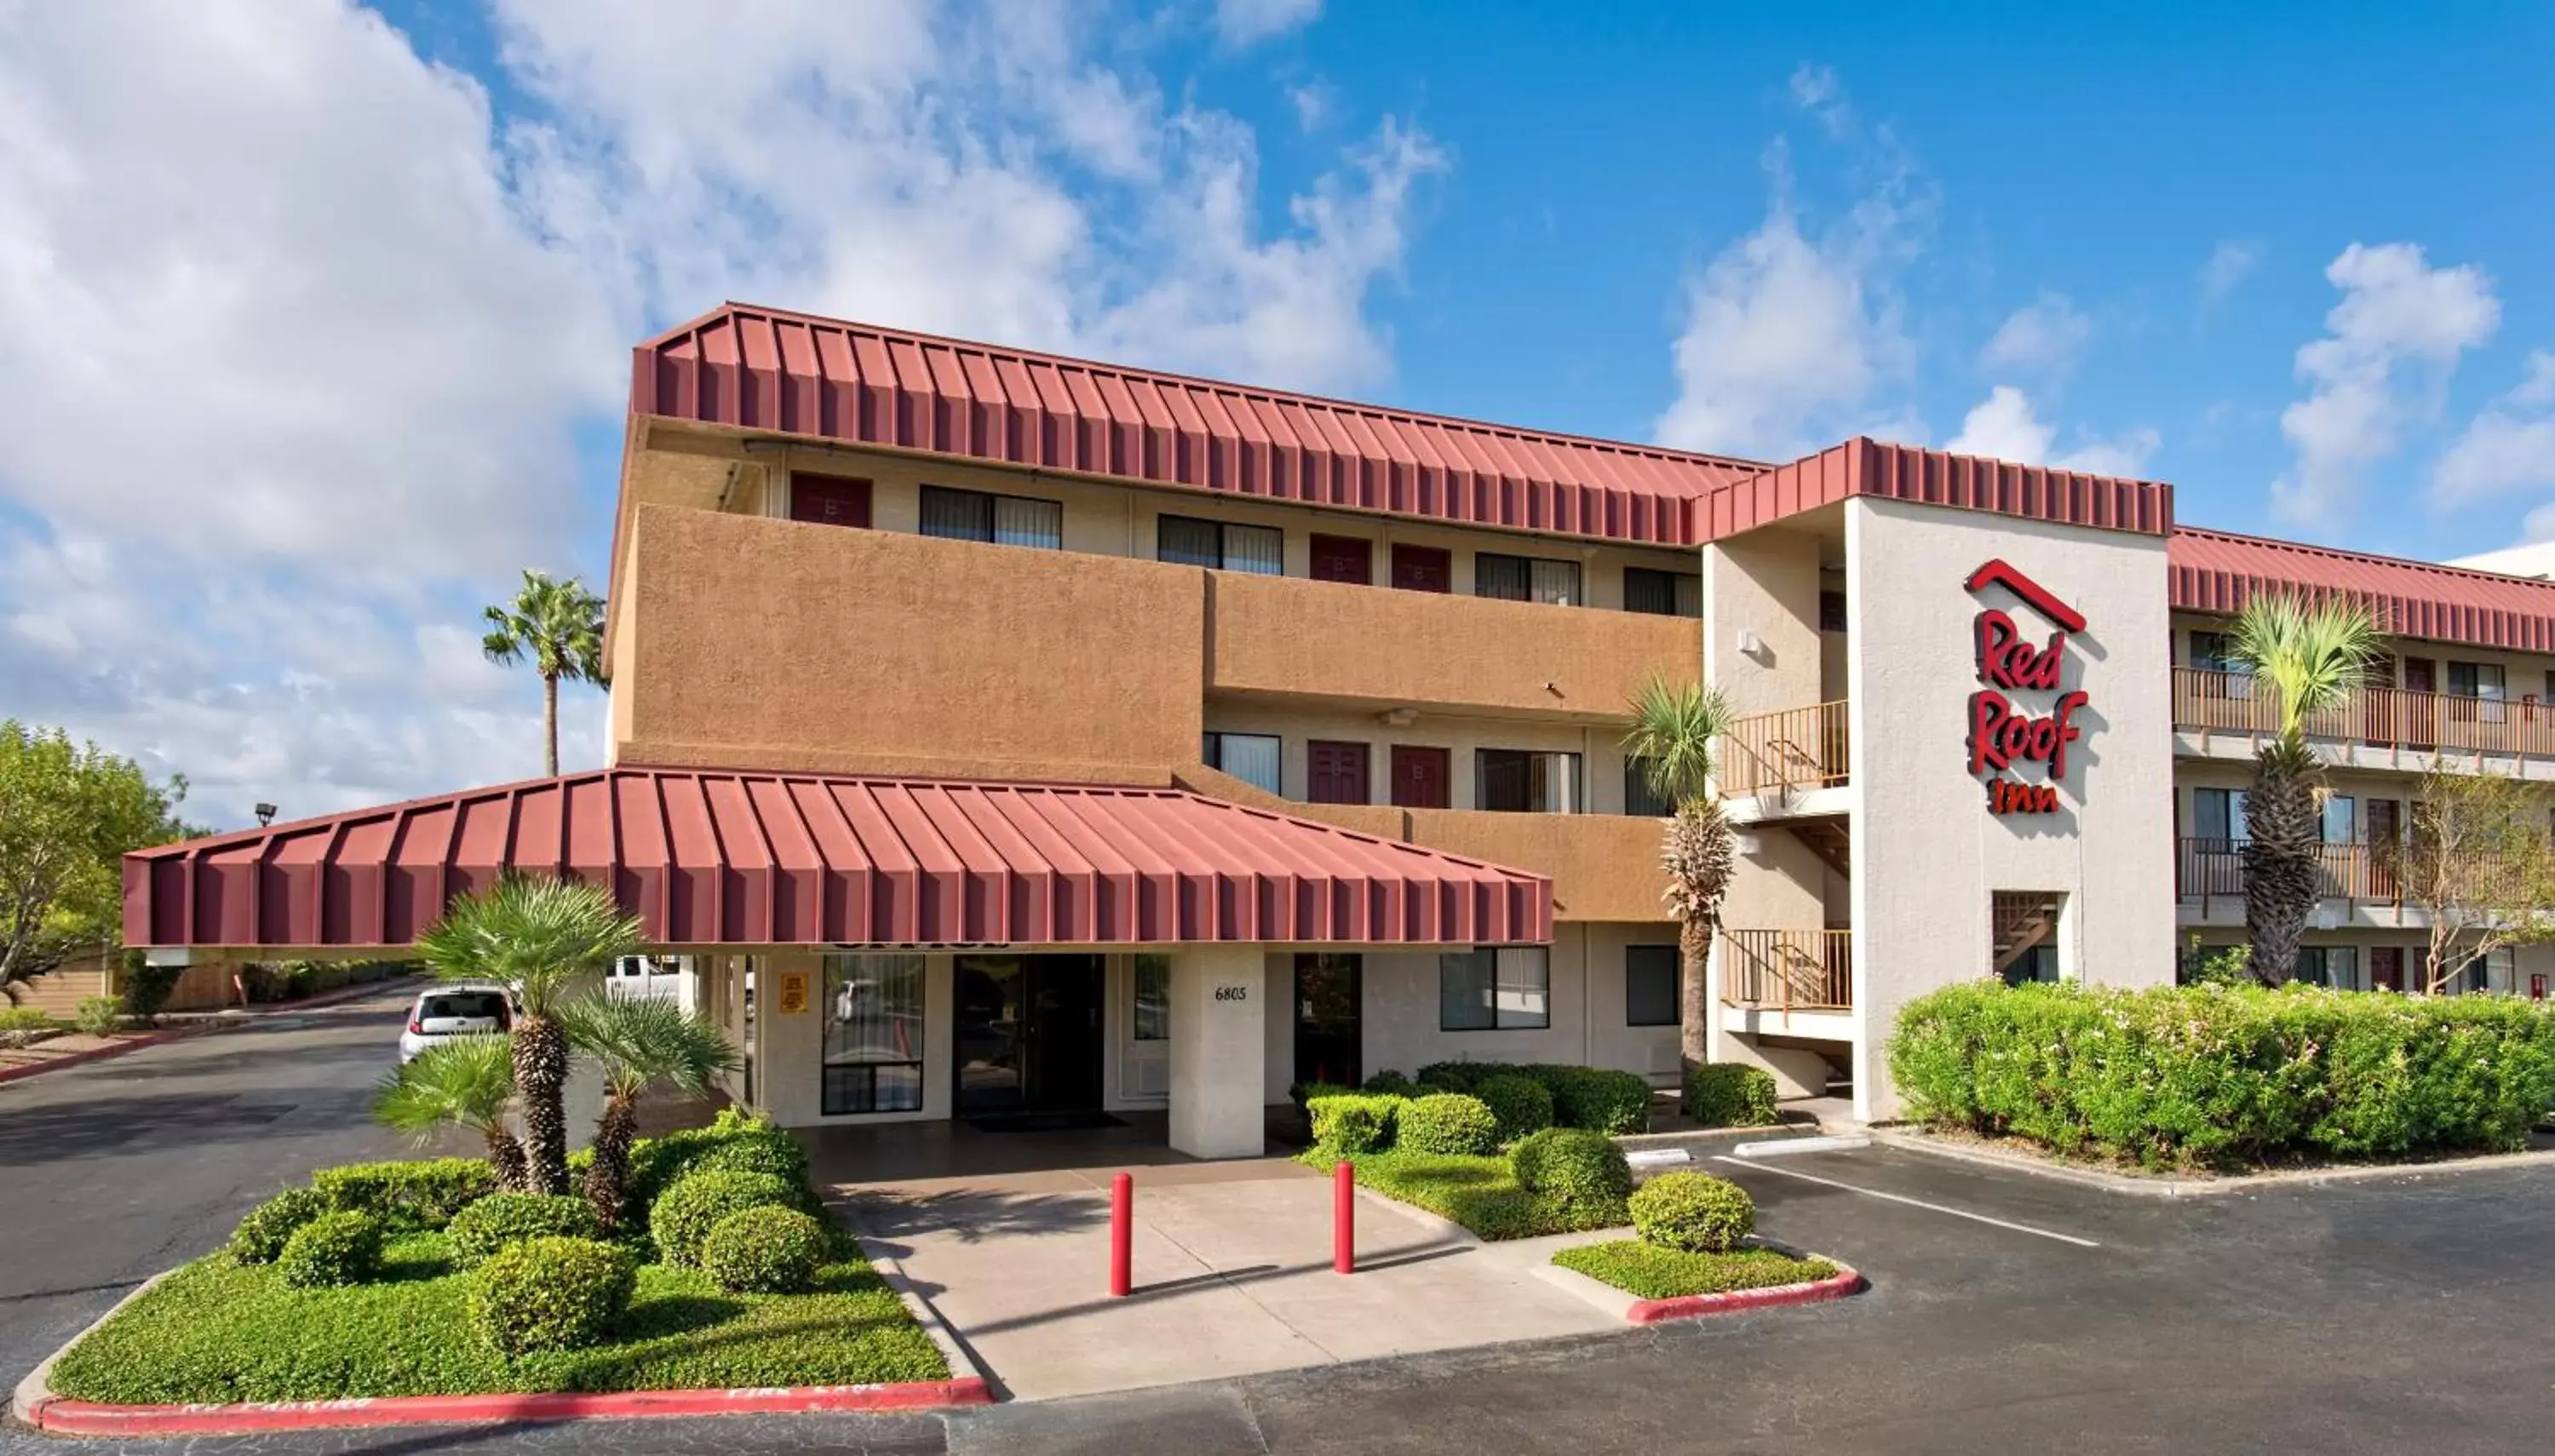 Property Building in Red Roof Inn Corpus Christi South